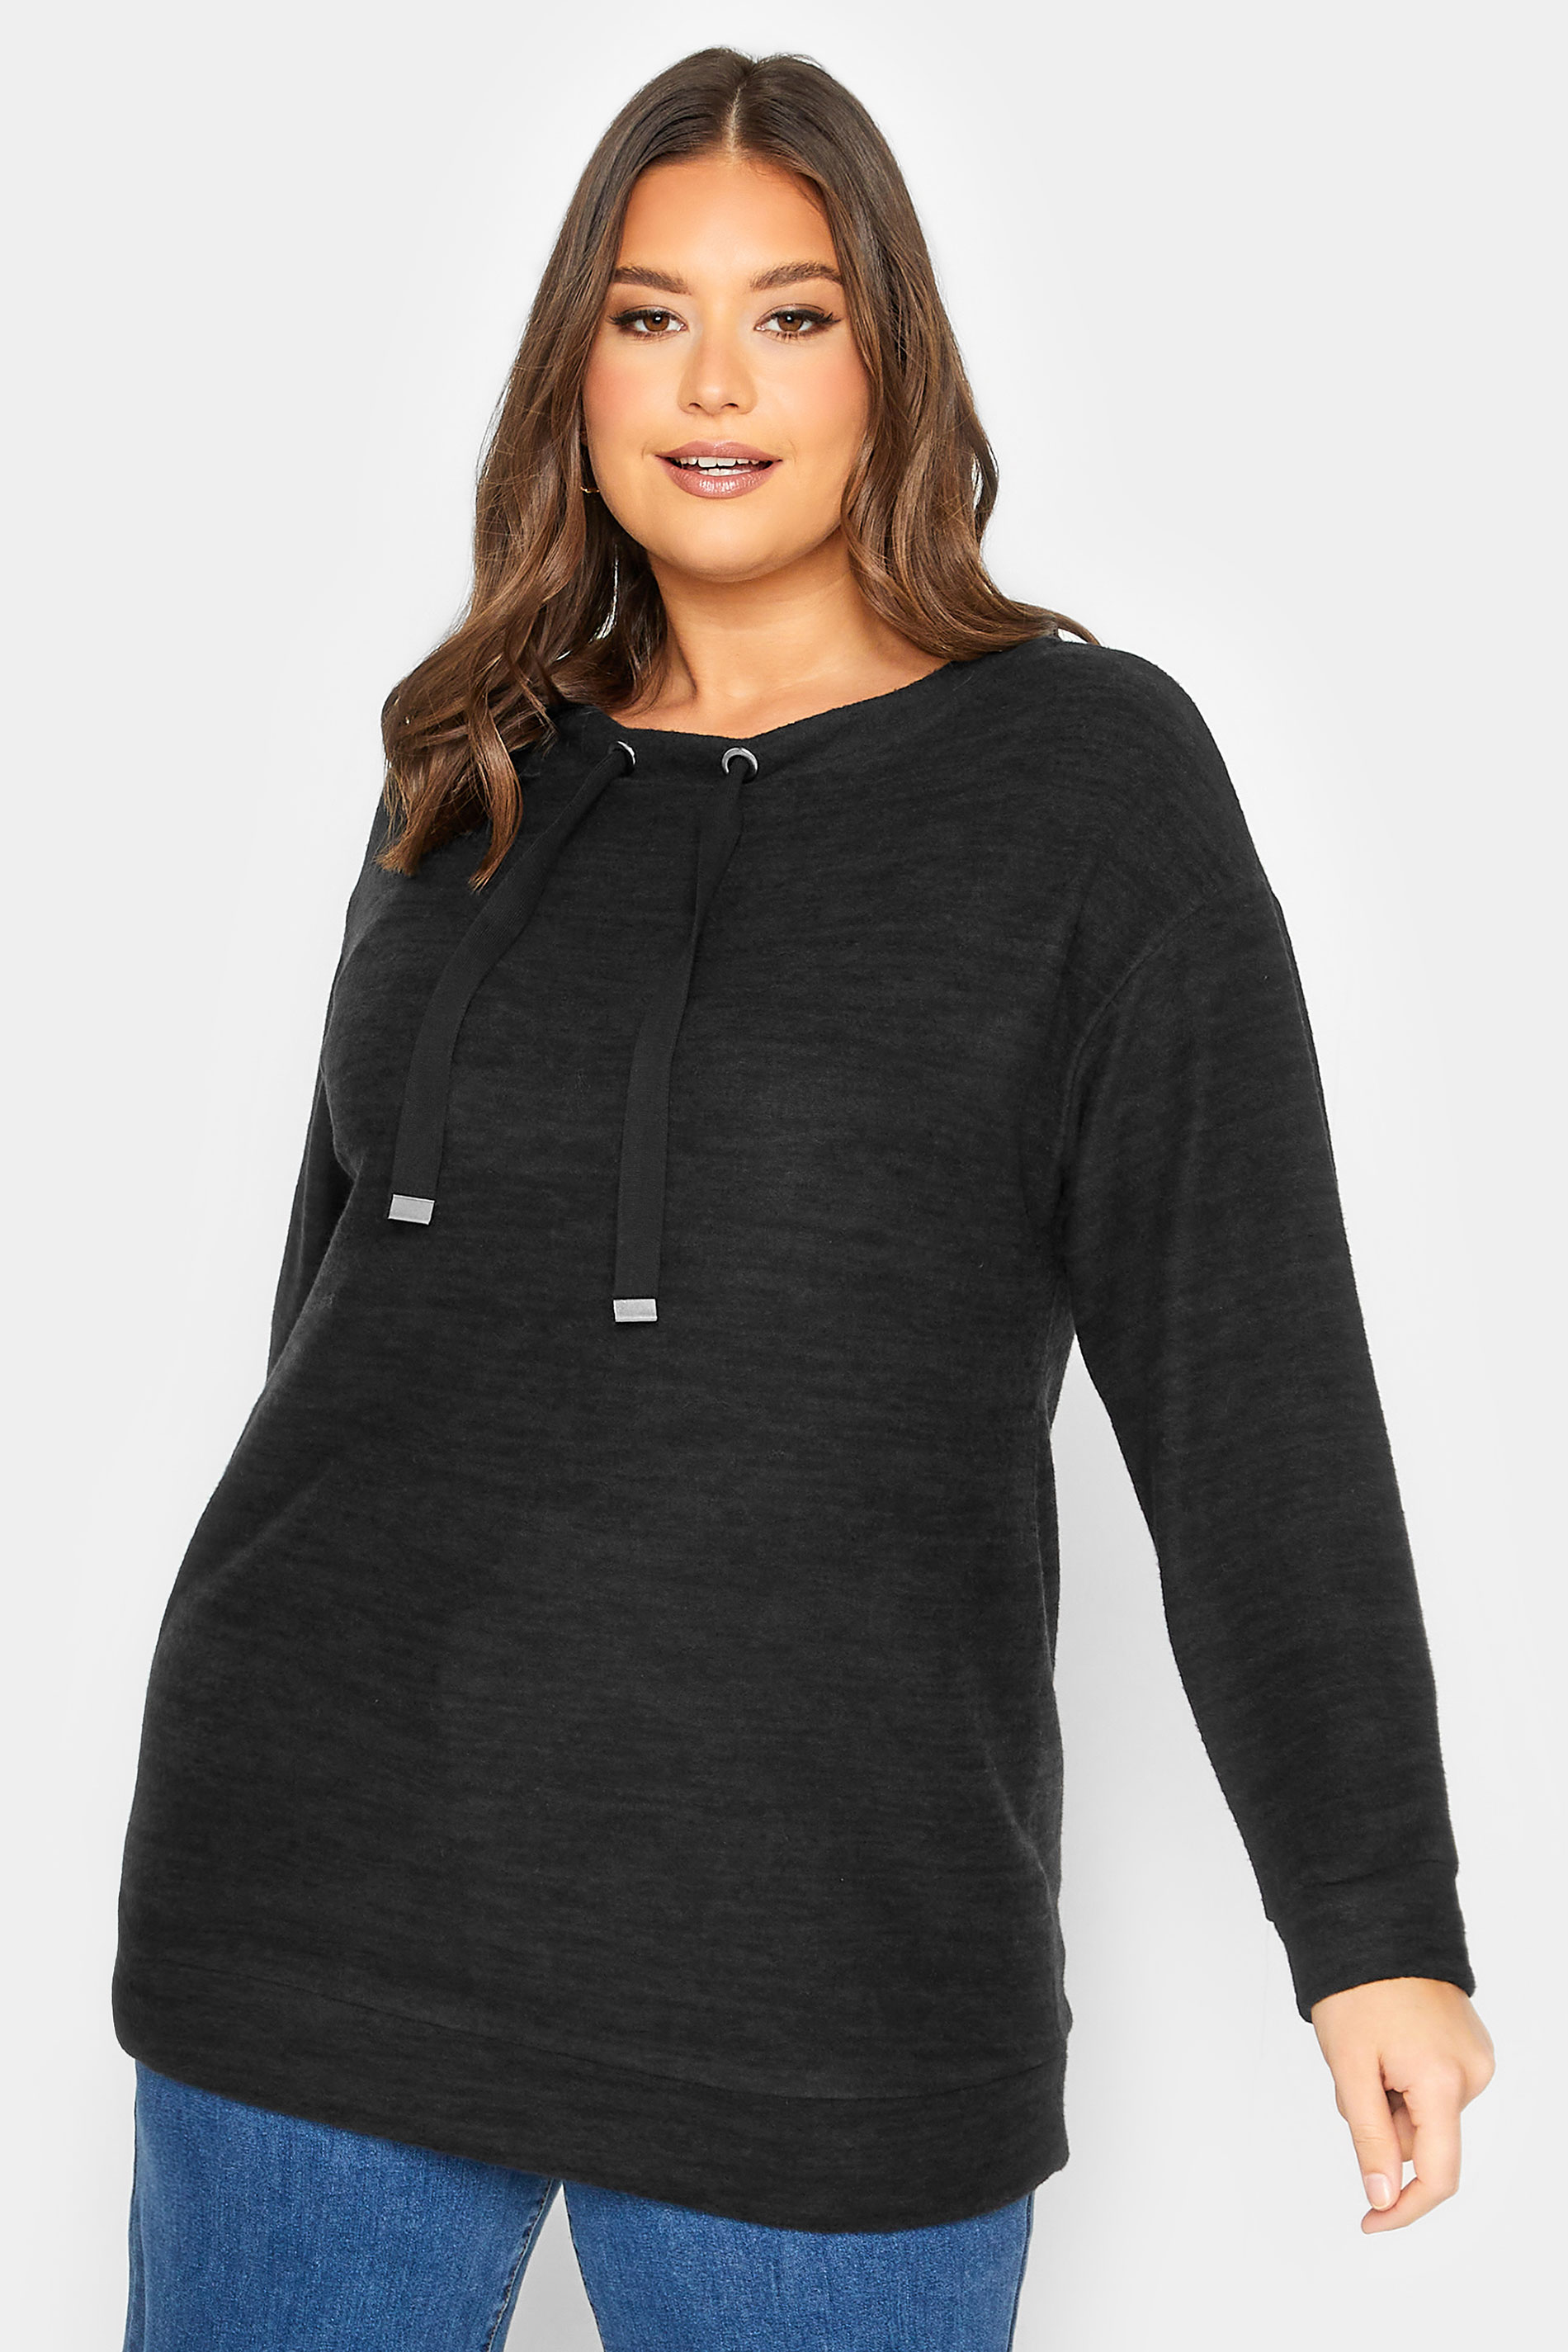 YOURS Plus Size Black Soft Touch Drawstring Sweatshirt | Yours Clothing 1